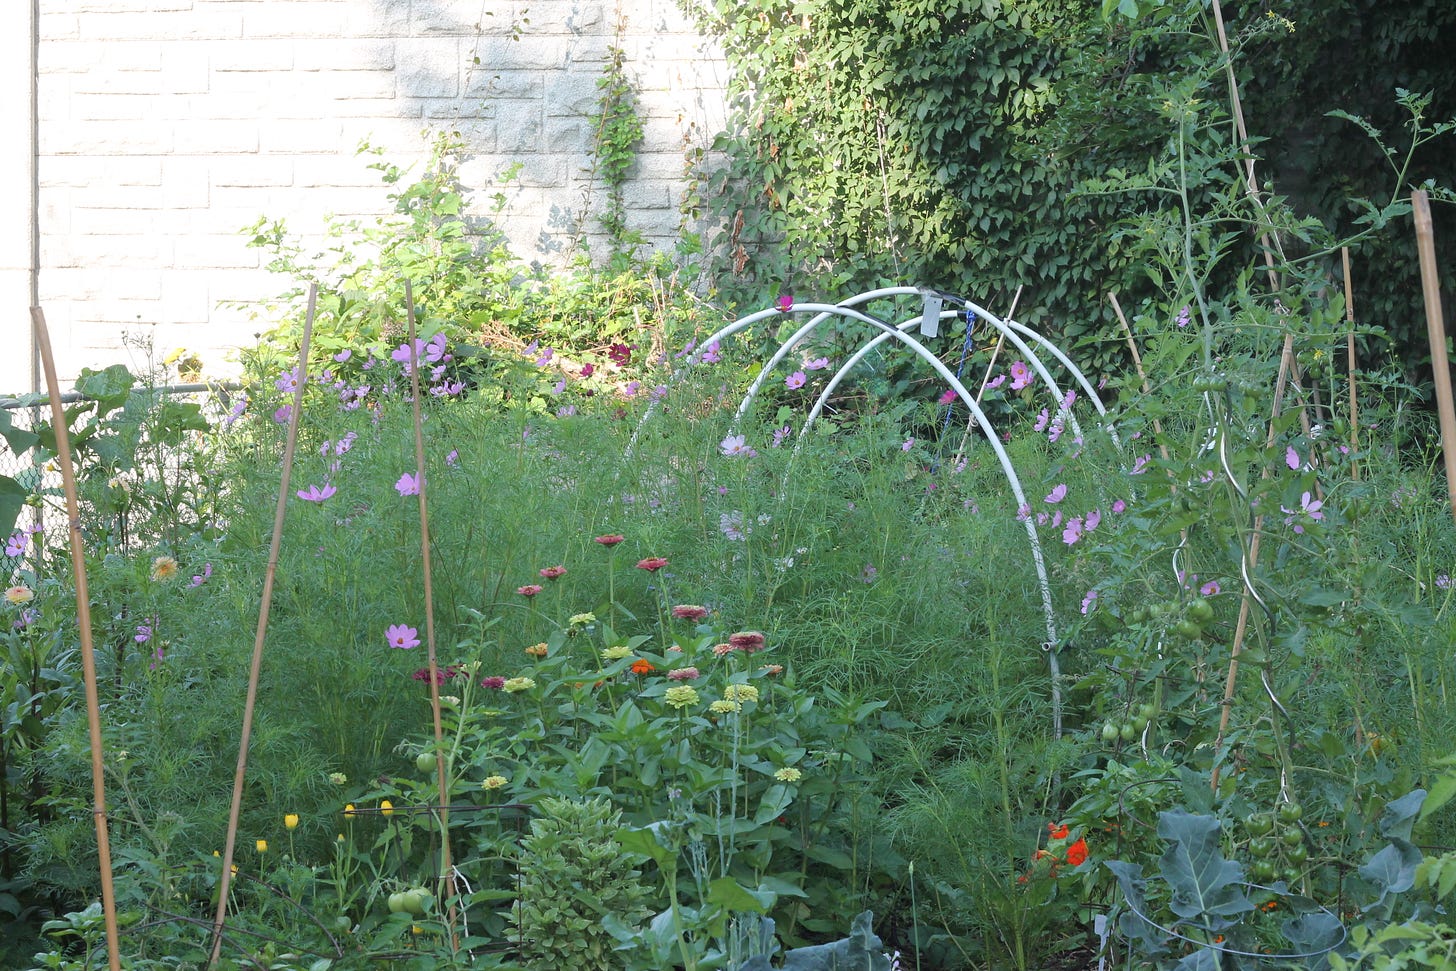 A garden, with staked tomatoes and zinnias in the foreground, a froth of cosmos throughout, and the frame of a low PVC hoop house in the back.